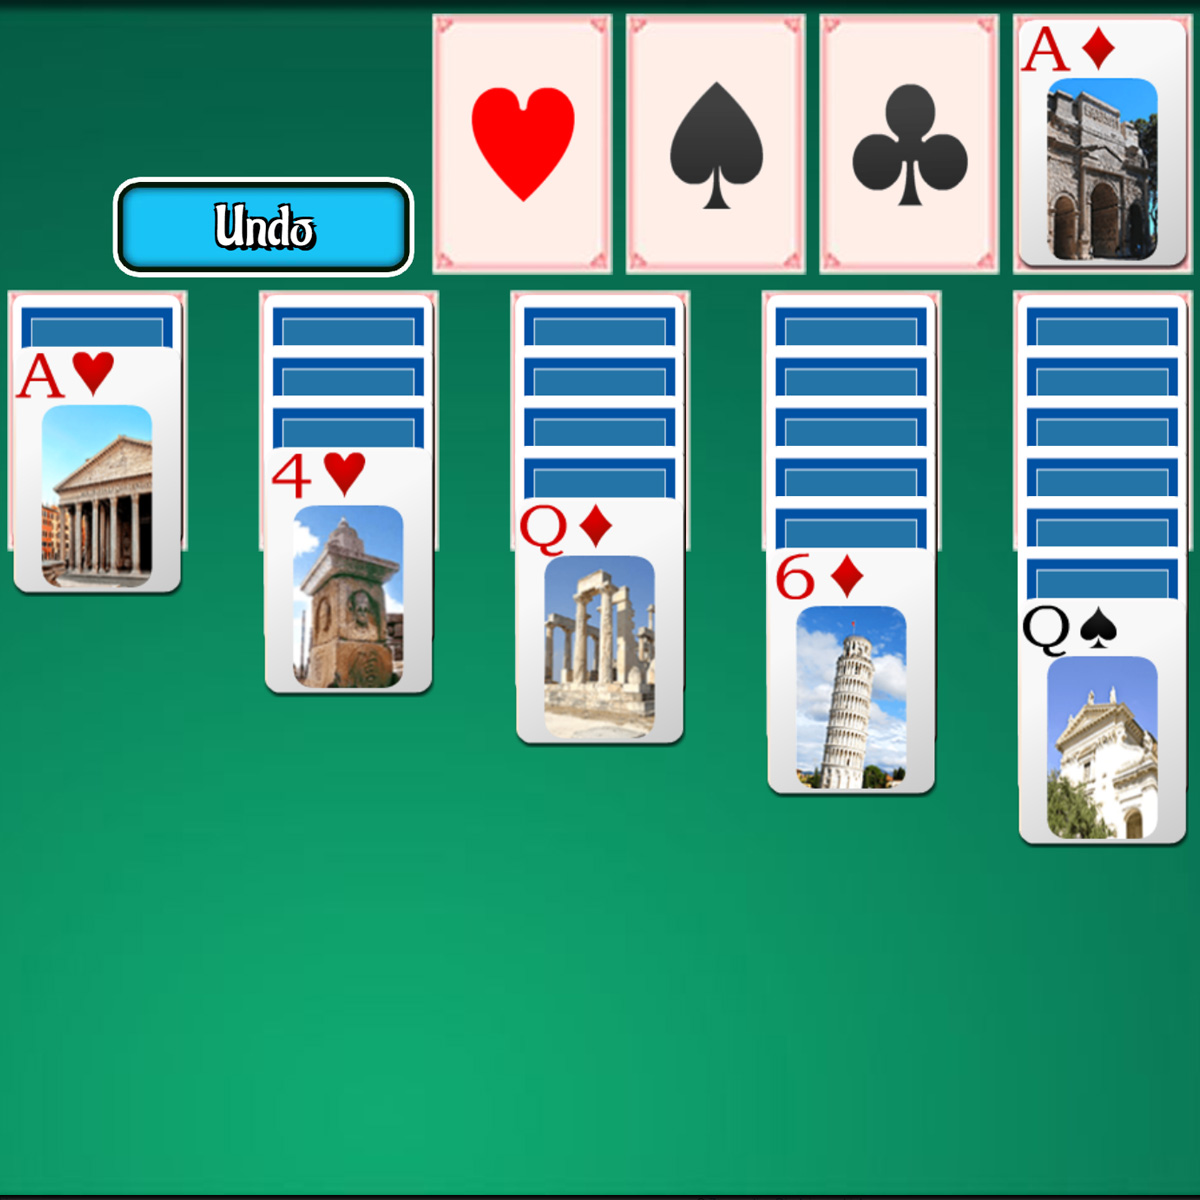 Play Classic Solitaire, 100% Free Online Game